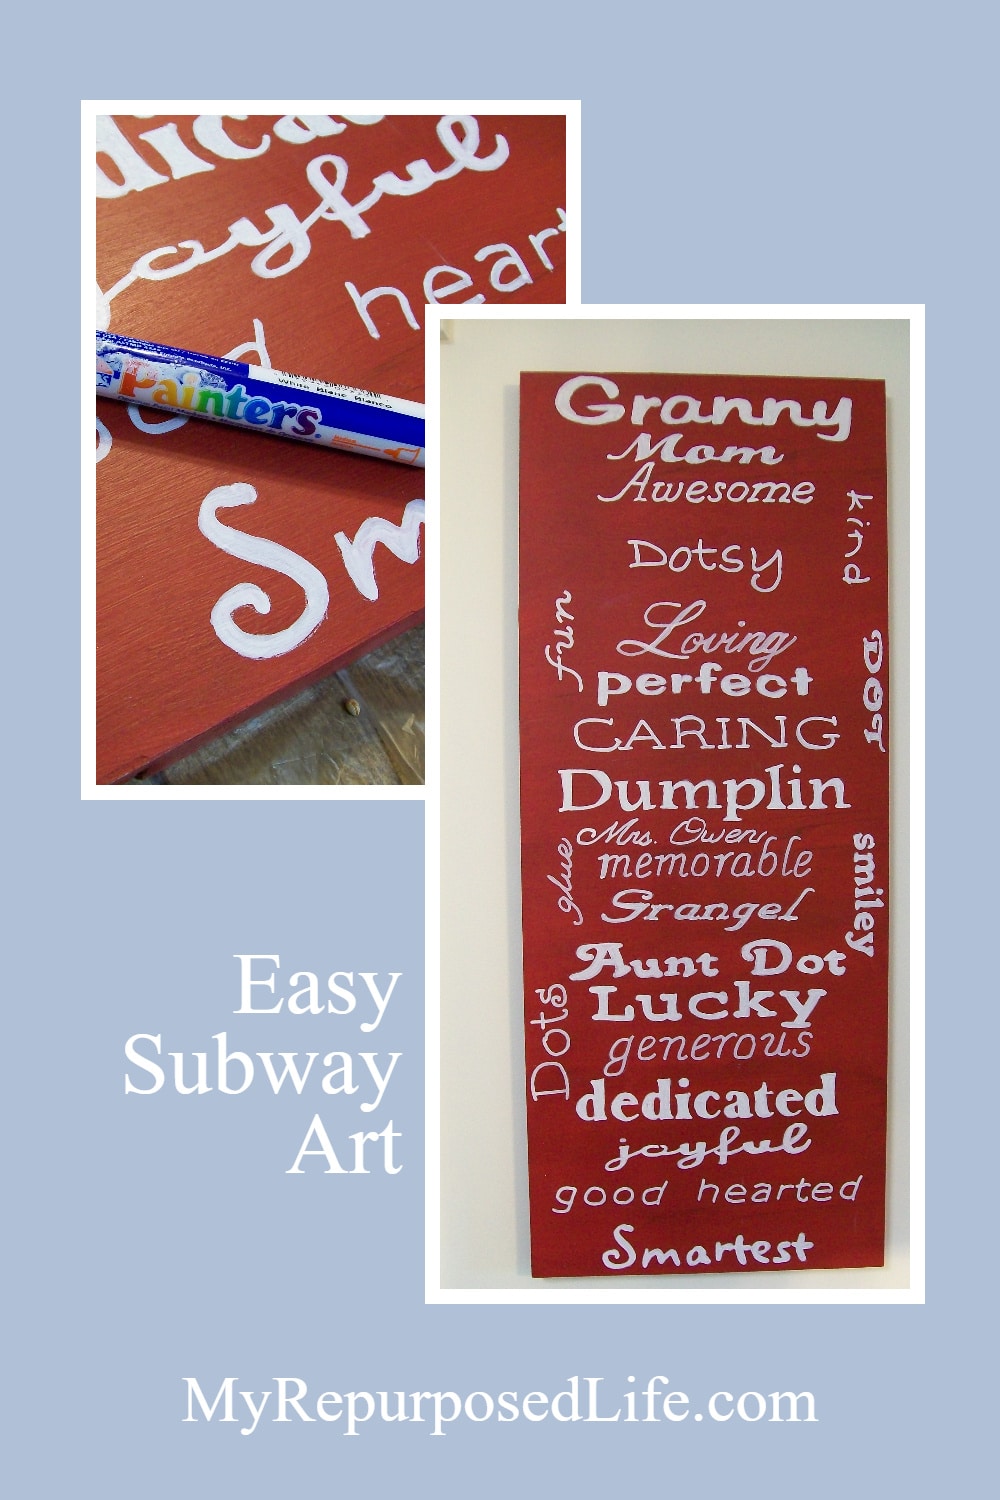 This easy gift idea is for anyone who wants to do a truly handmade gift for someone special. No special tools needed. #MyRepurposedLife #easy #subwayart via @repurposedlife